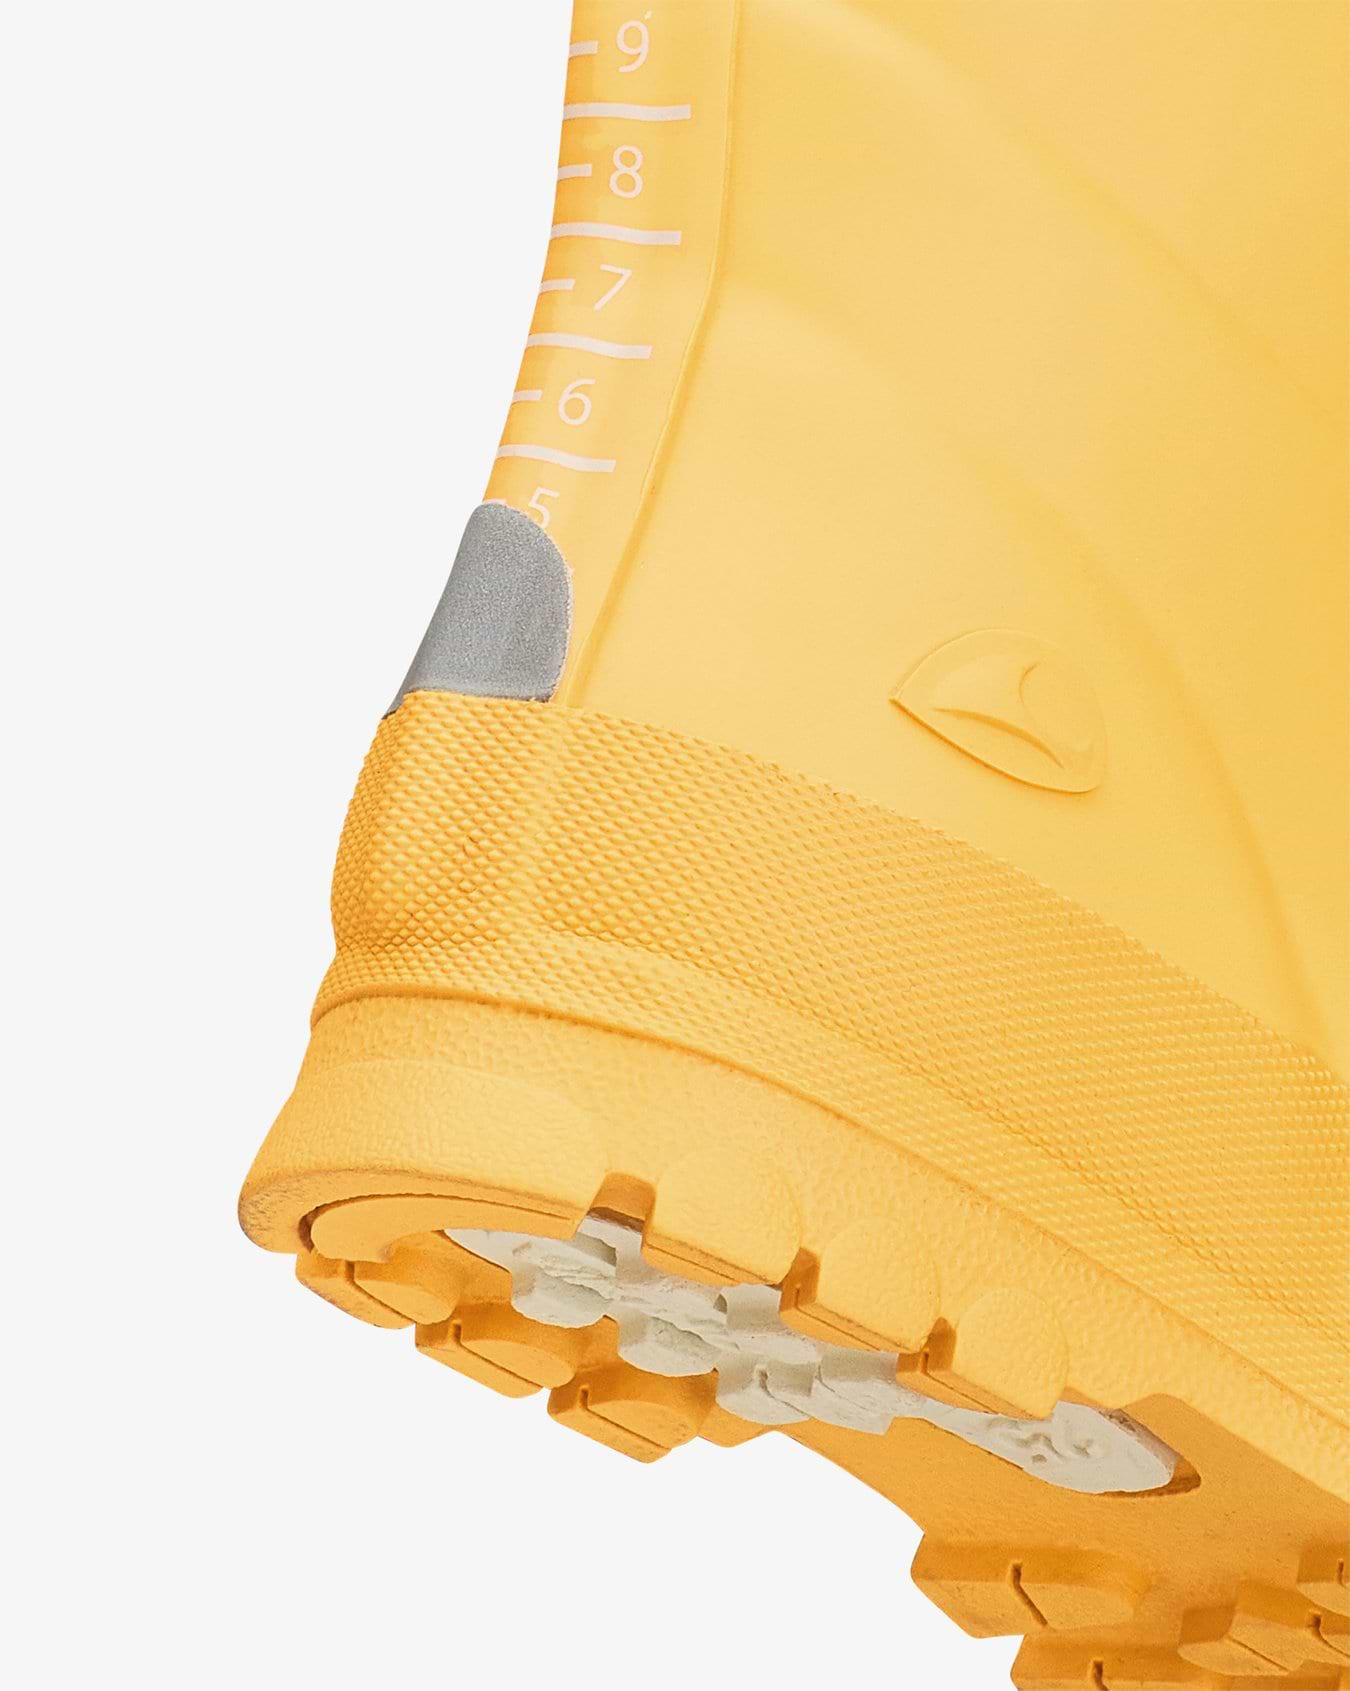 Alv Jolly Yellow Rubber Boot